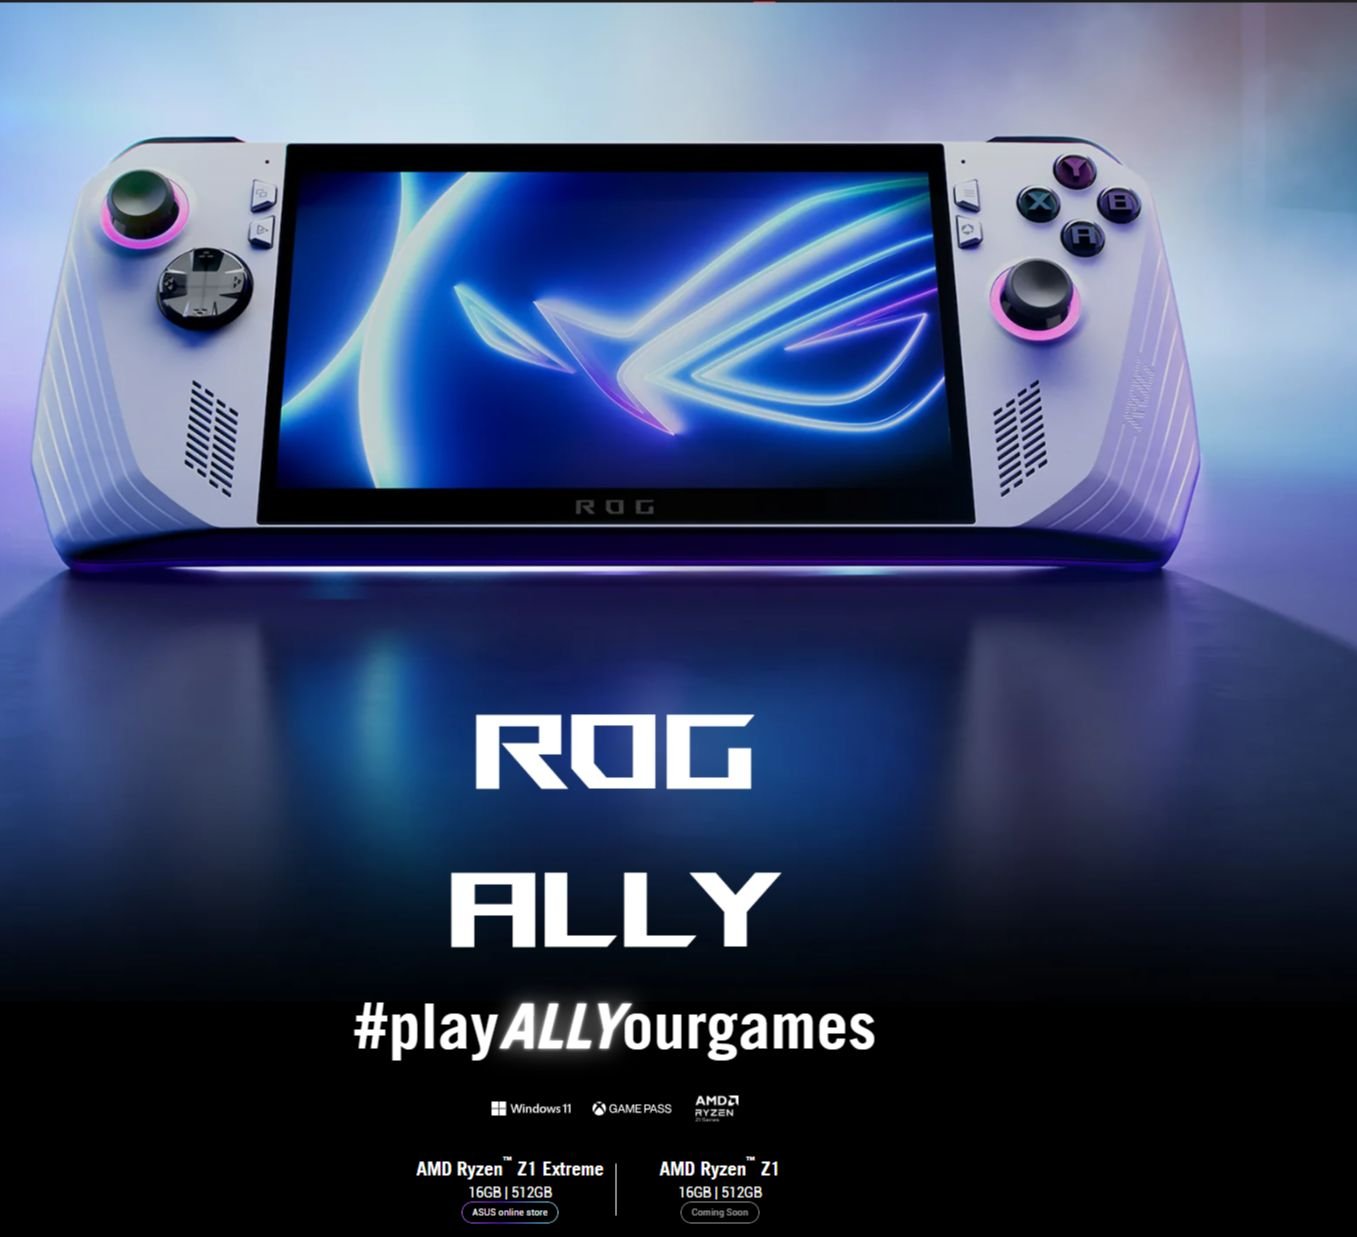 ROG Ally review - A funstrating gaming experience